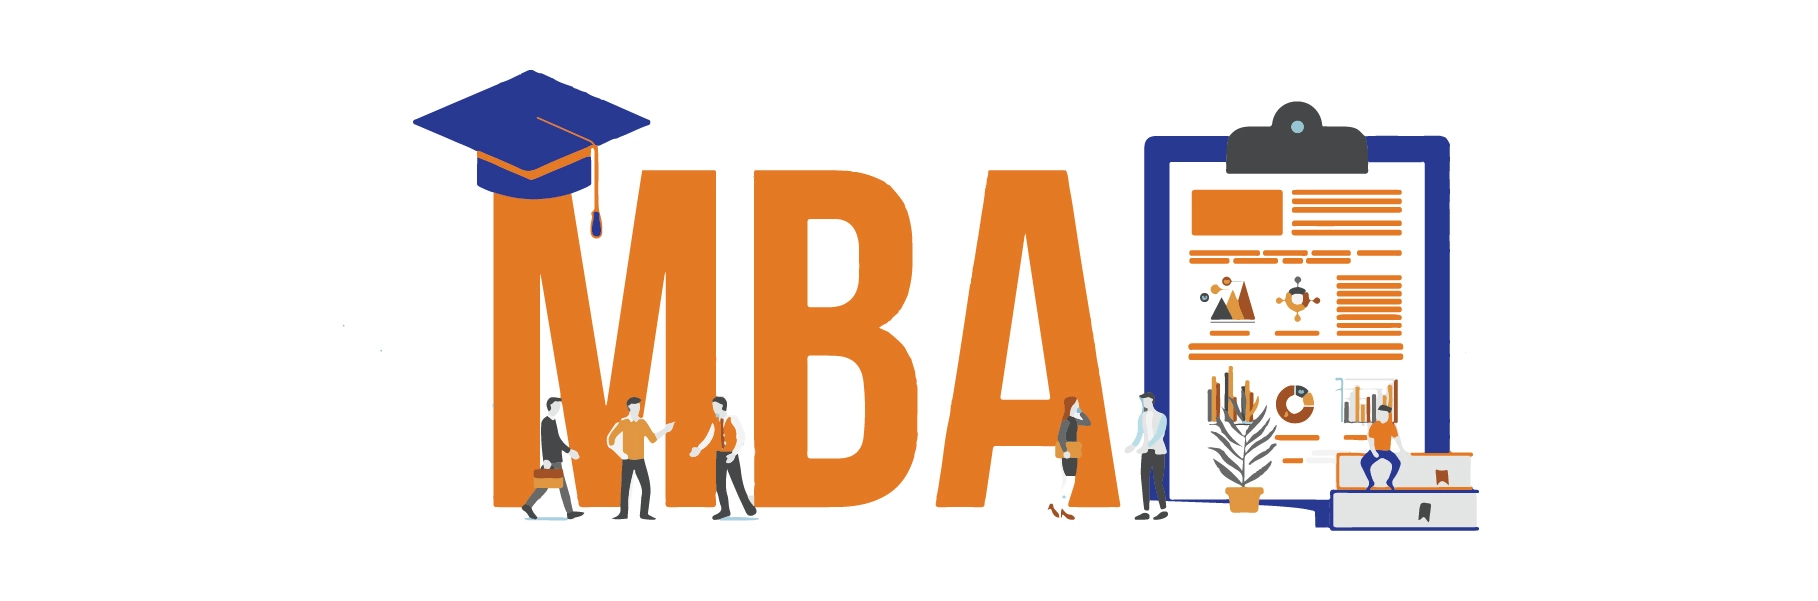 Pursue MBA Without GMAT: Find Out Top MBA Programs & Colleges Abroad Without GMAT Image